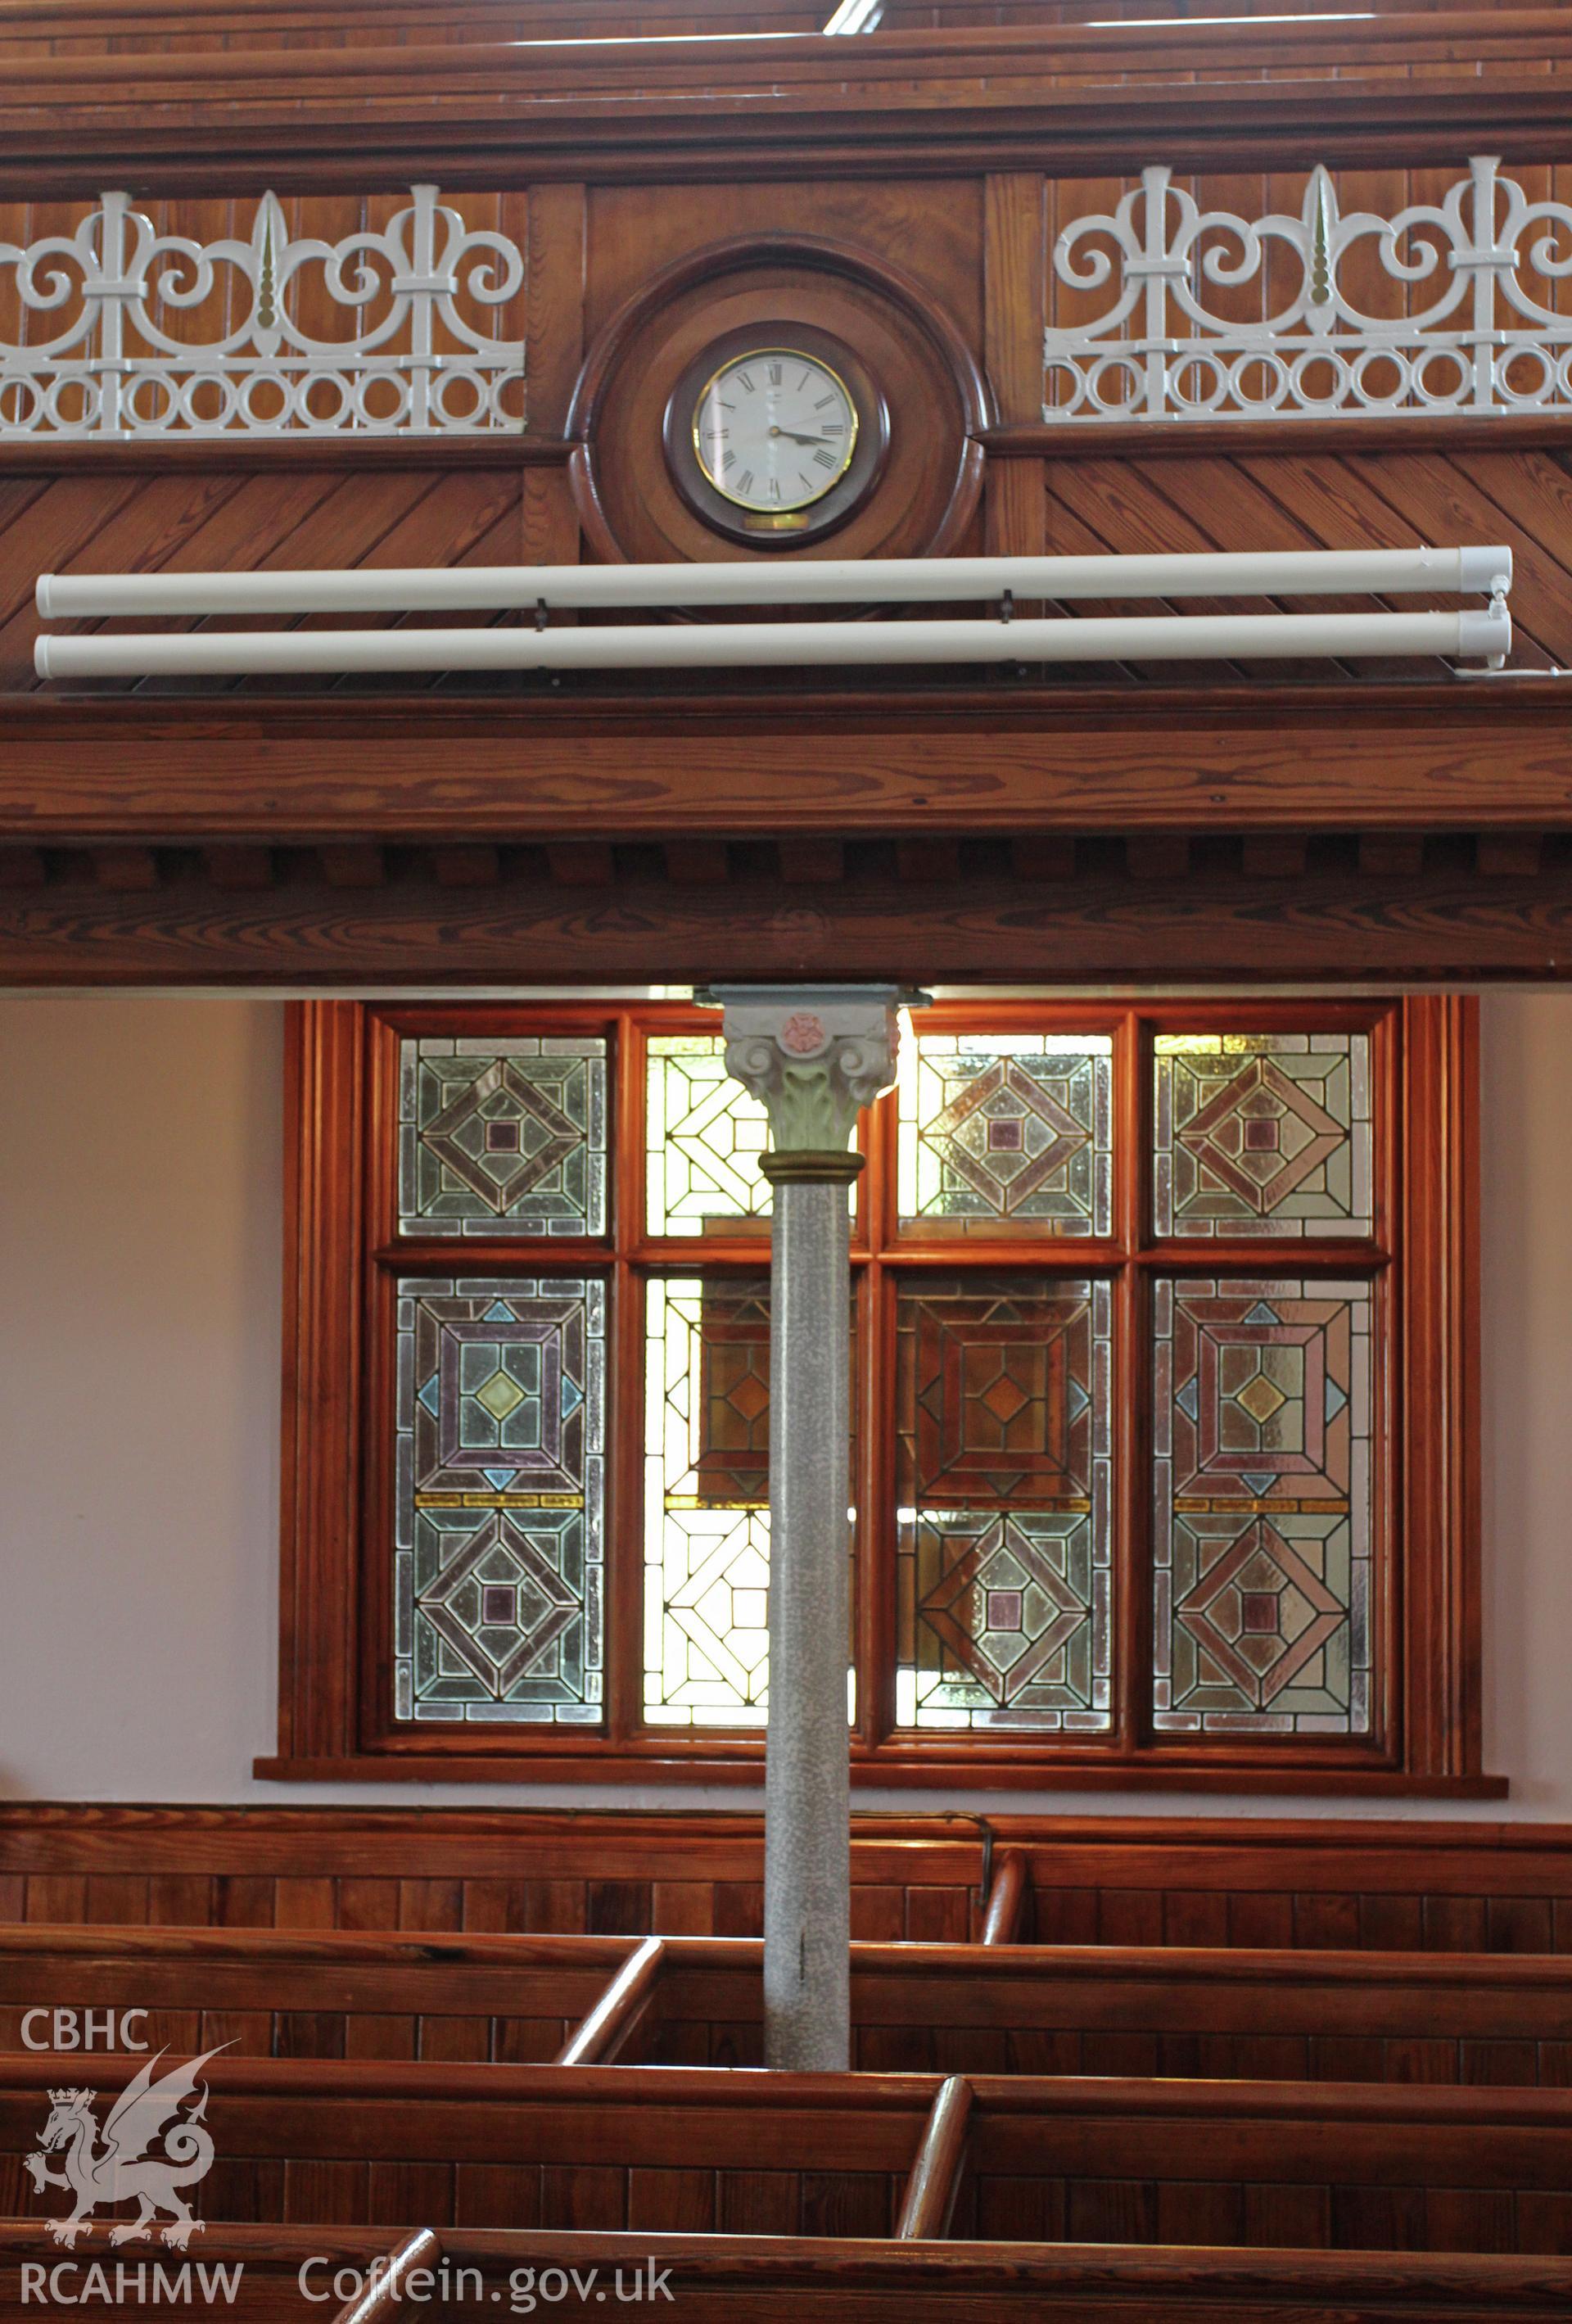 Detail of gallery front, column and clock